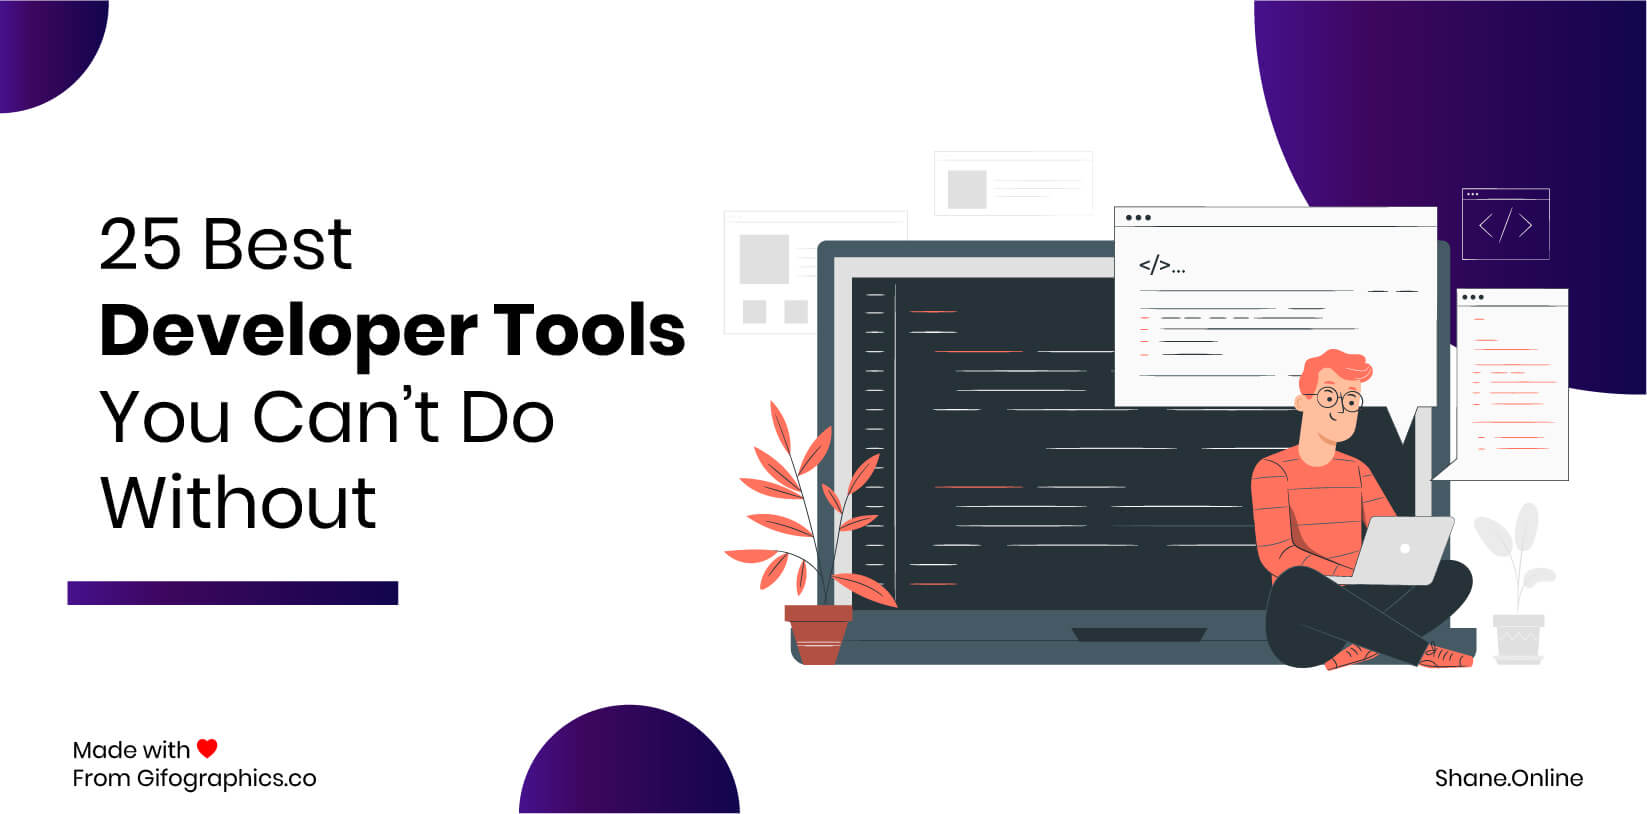 20 Best Developer Tools You Can't Do Without   Shane Barker